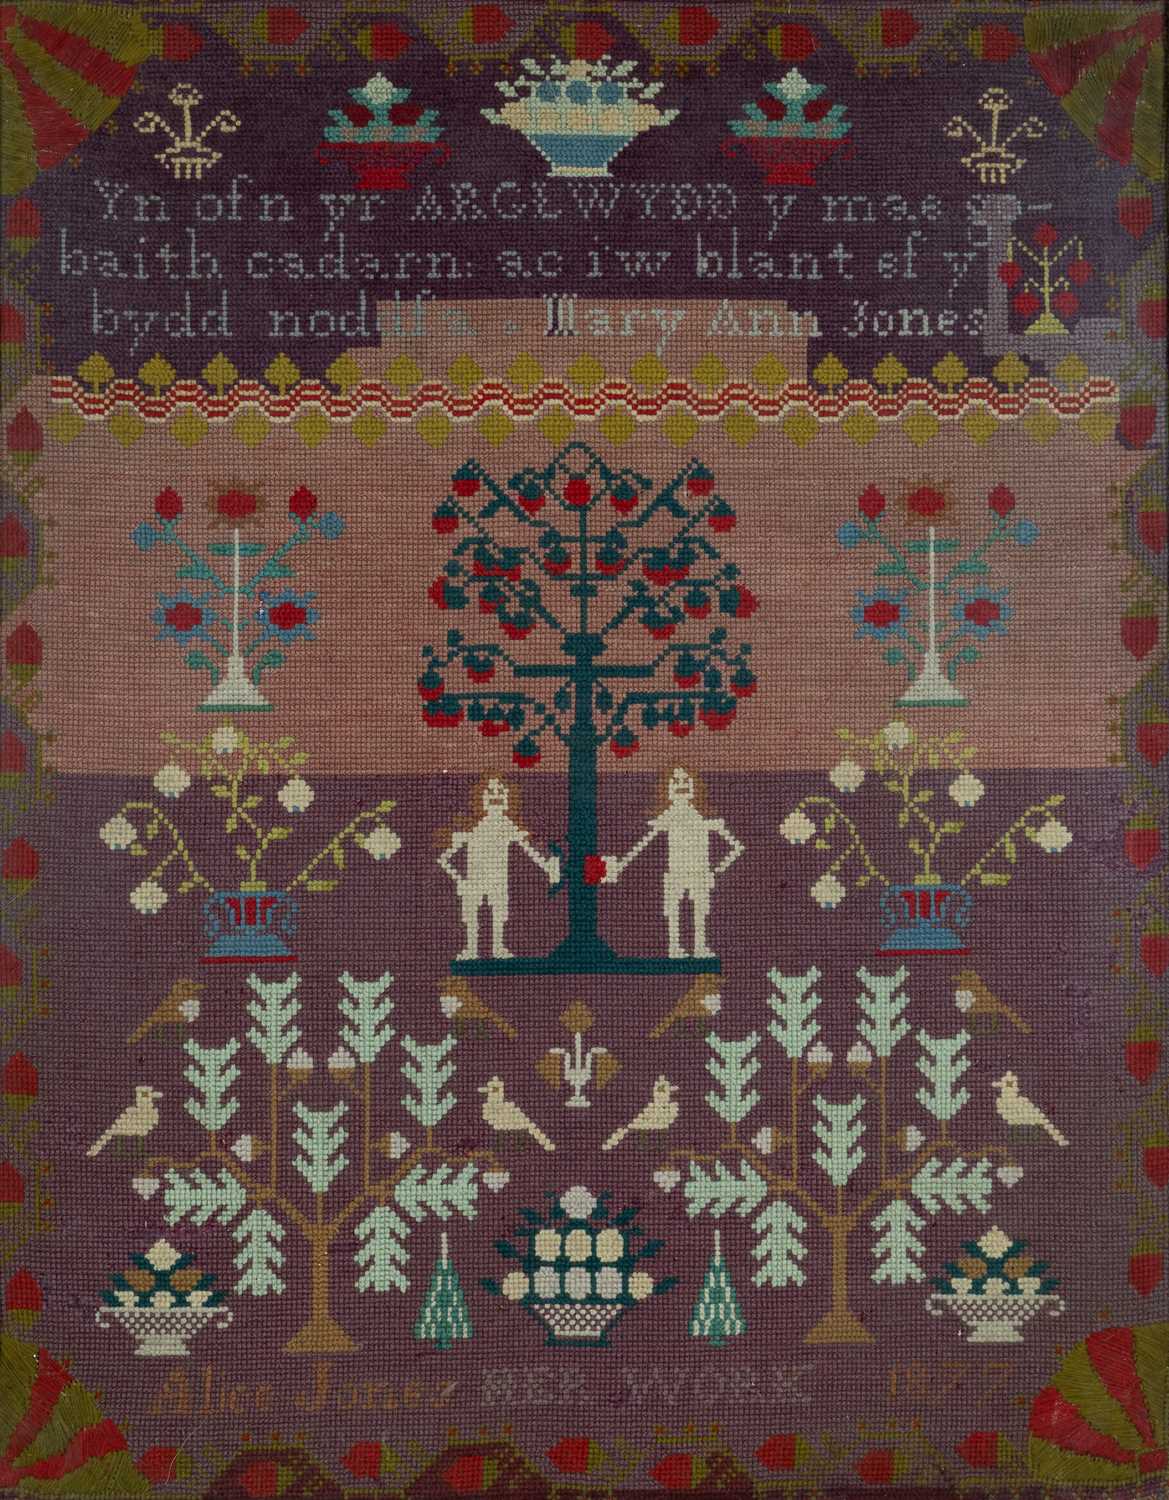 VICTORIAN WELSH LANGUAGE WOOLWORK SAMPLER worked by Alice Jones, dated 1877, Welsh language